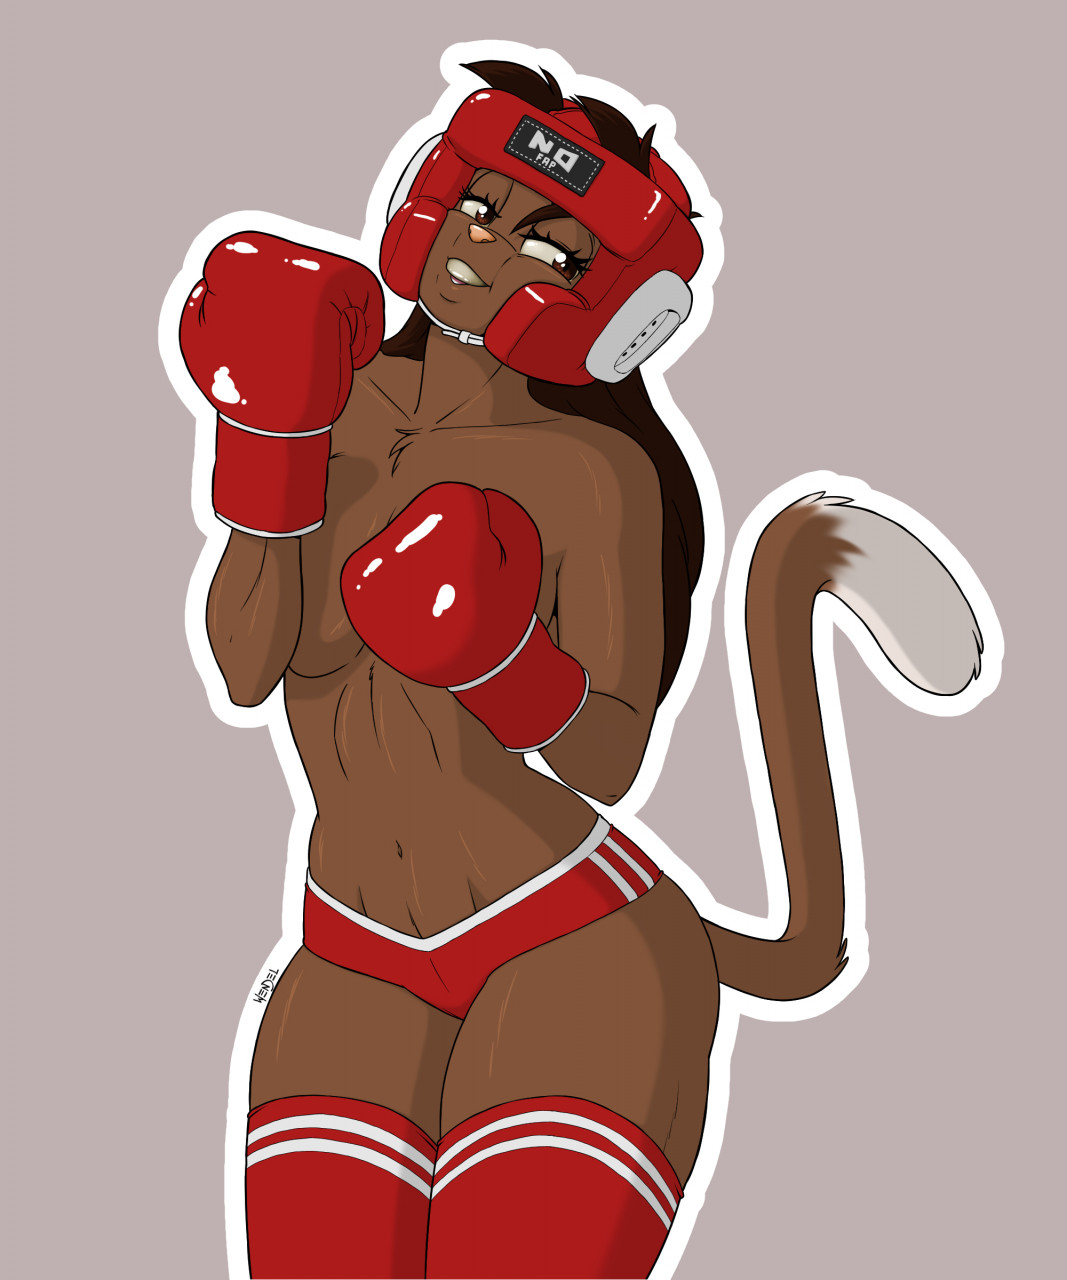 Topless boxing